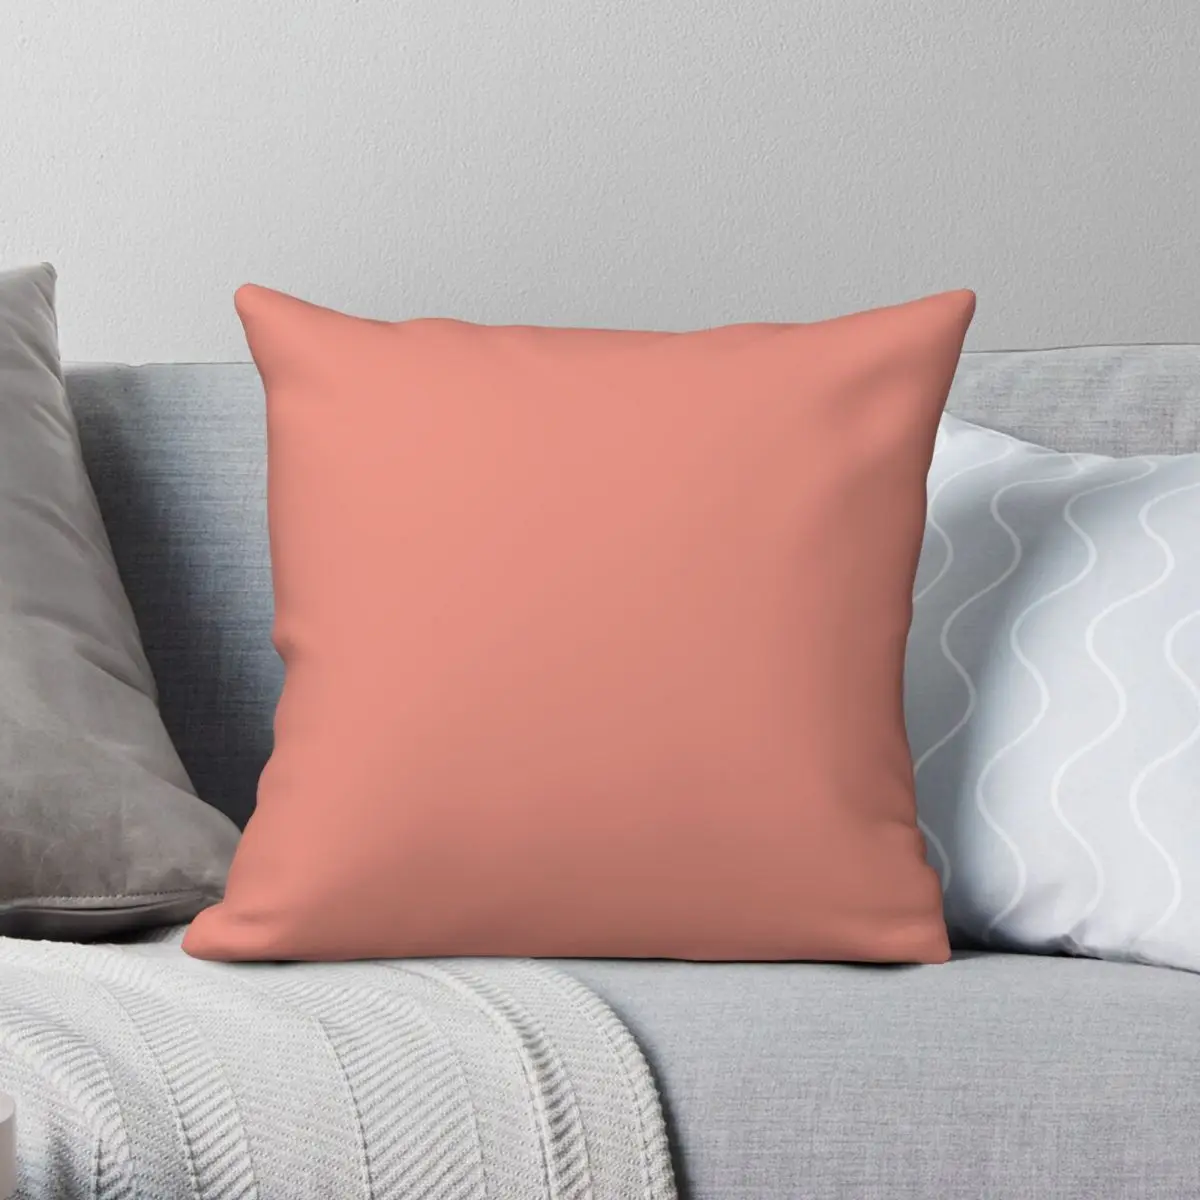 

Chic Girly Peach Color Blush Coral Pink Pillowcase Polyester Linen Velvet Printed Zip Decor Throw Pillow Case Home Cushion Cover